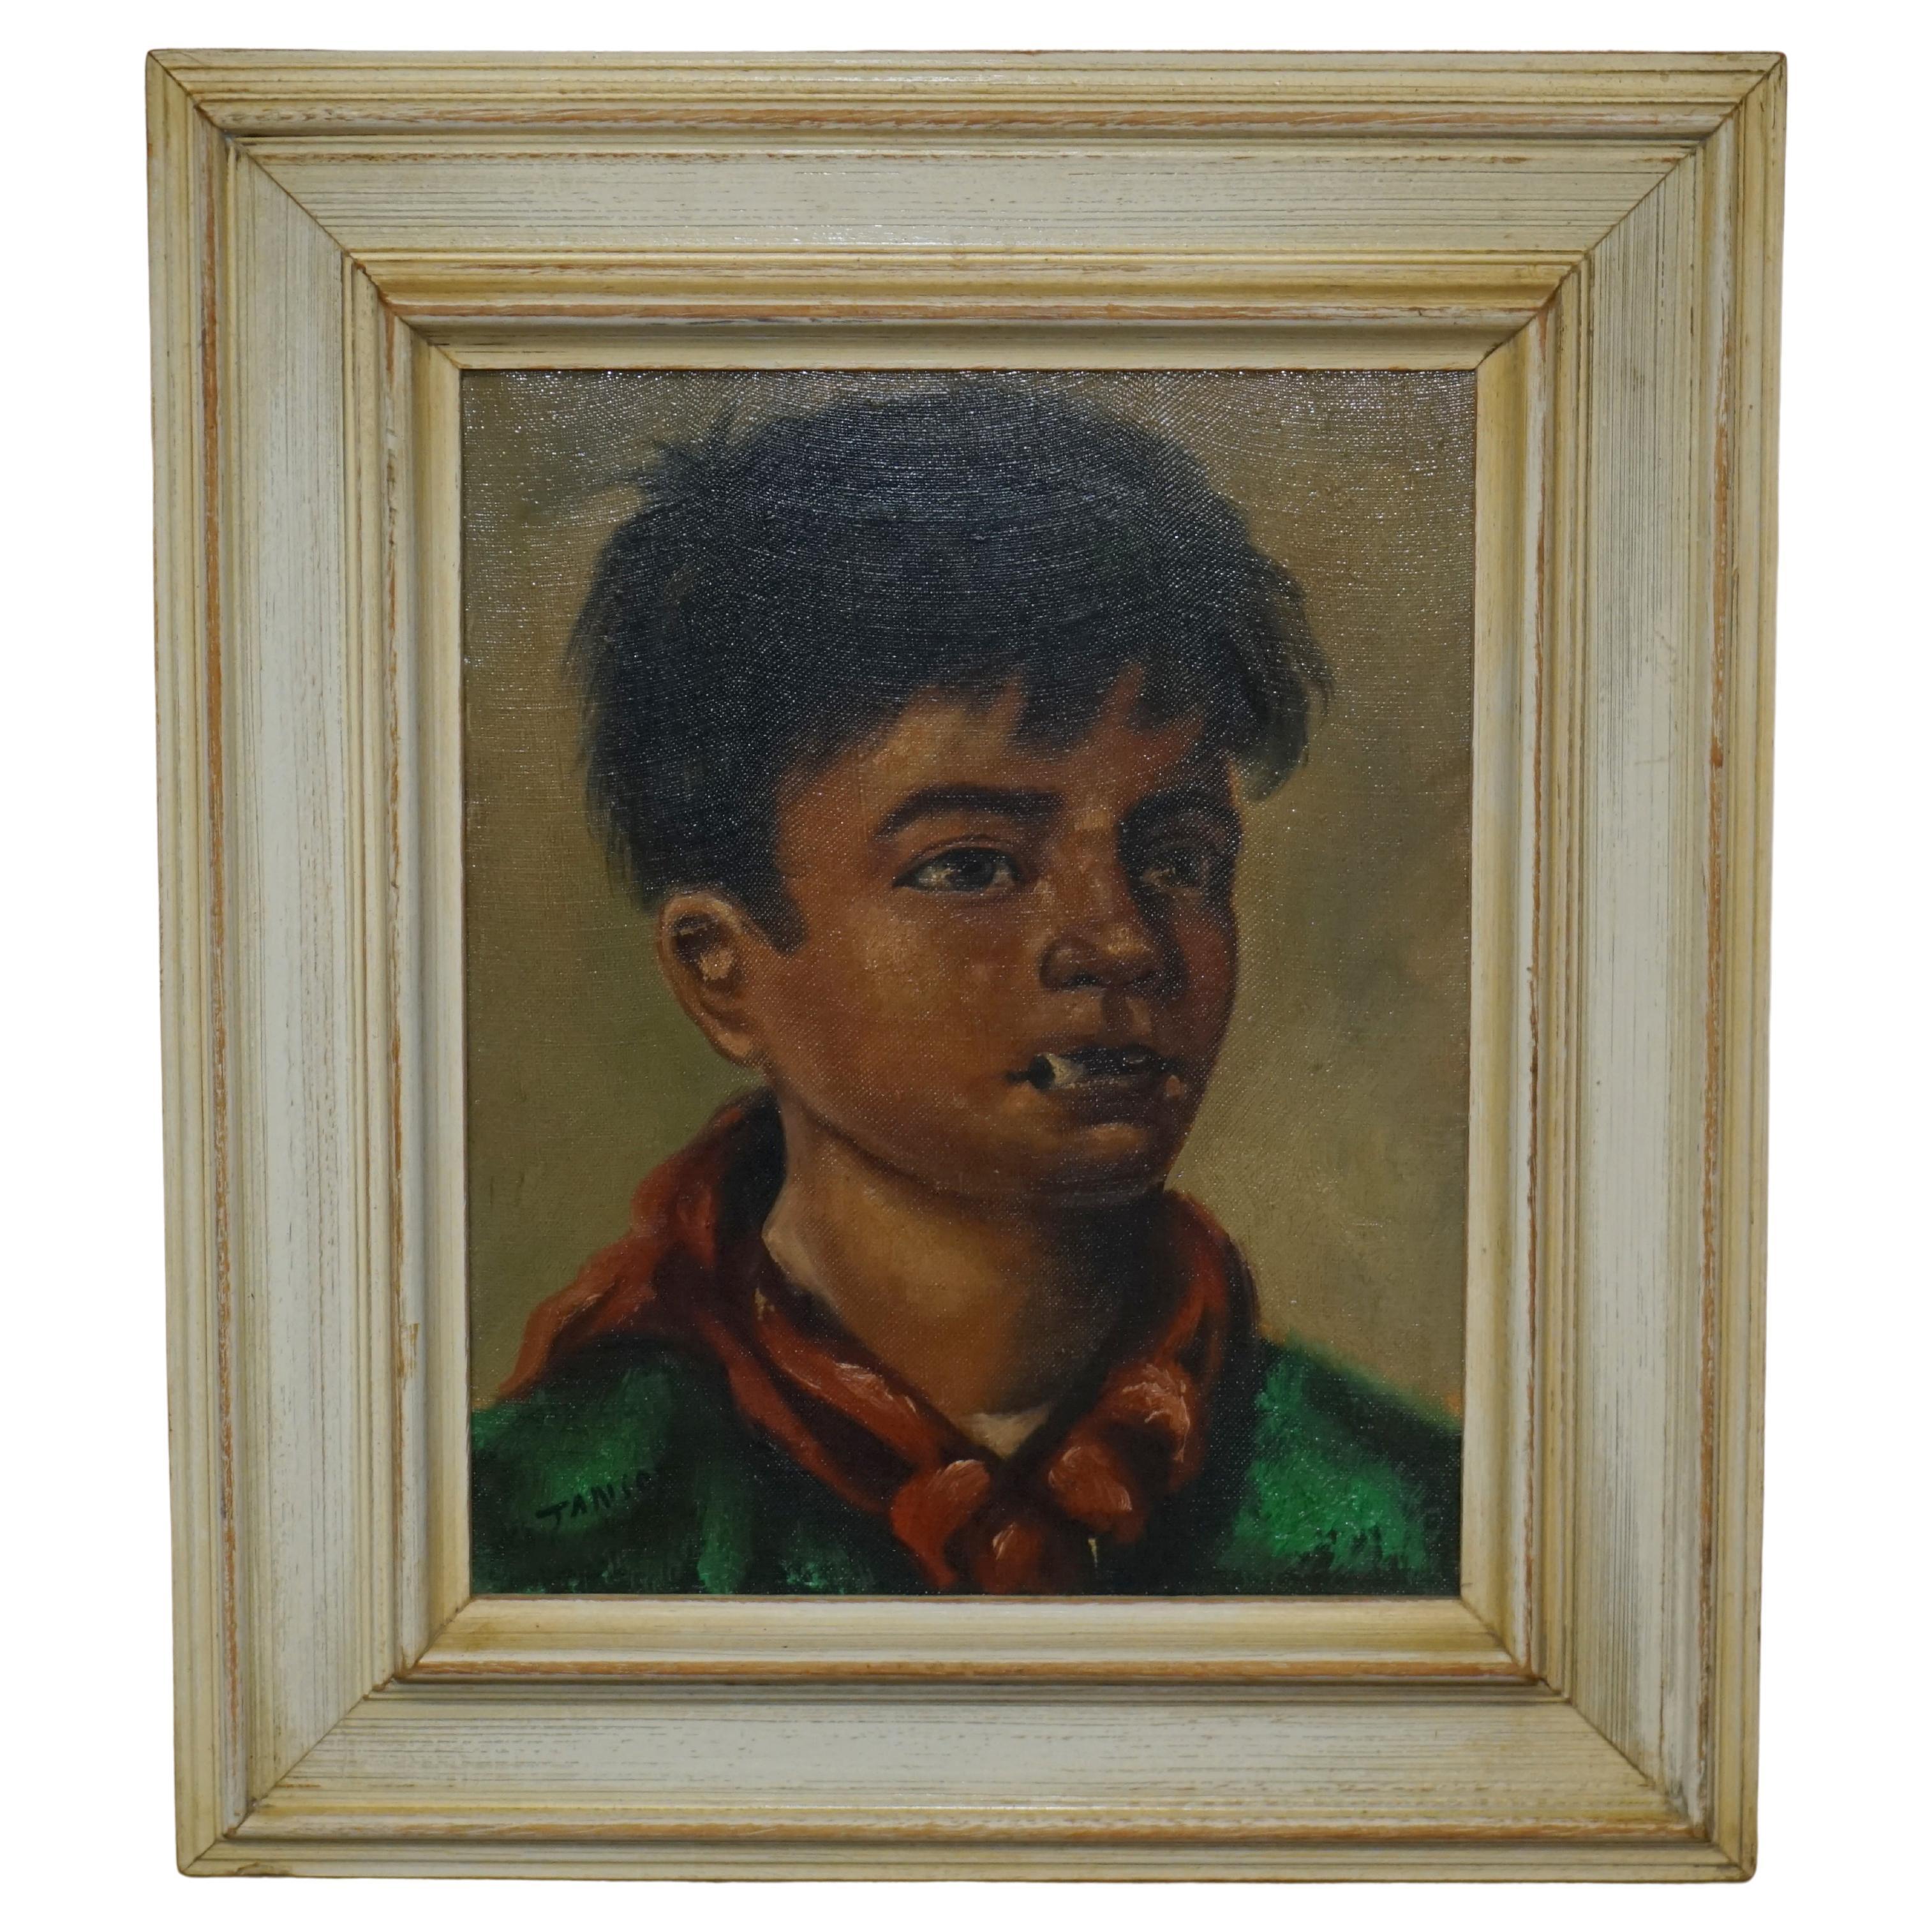 Antique Signed Janson Belgium Oil on Canvas Painting of Young Boy Smoking